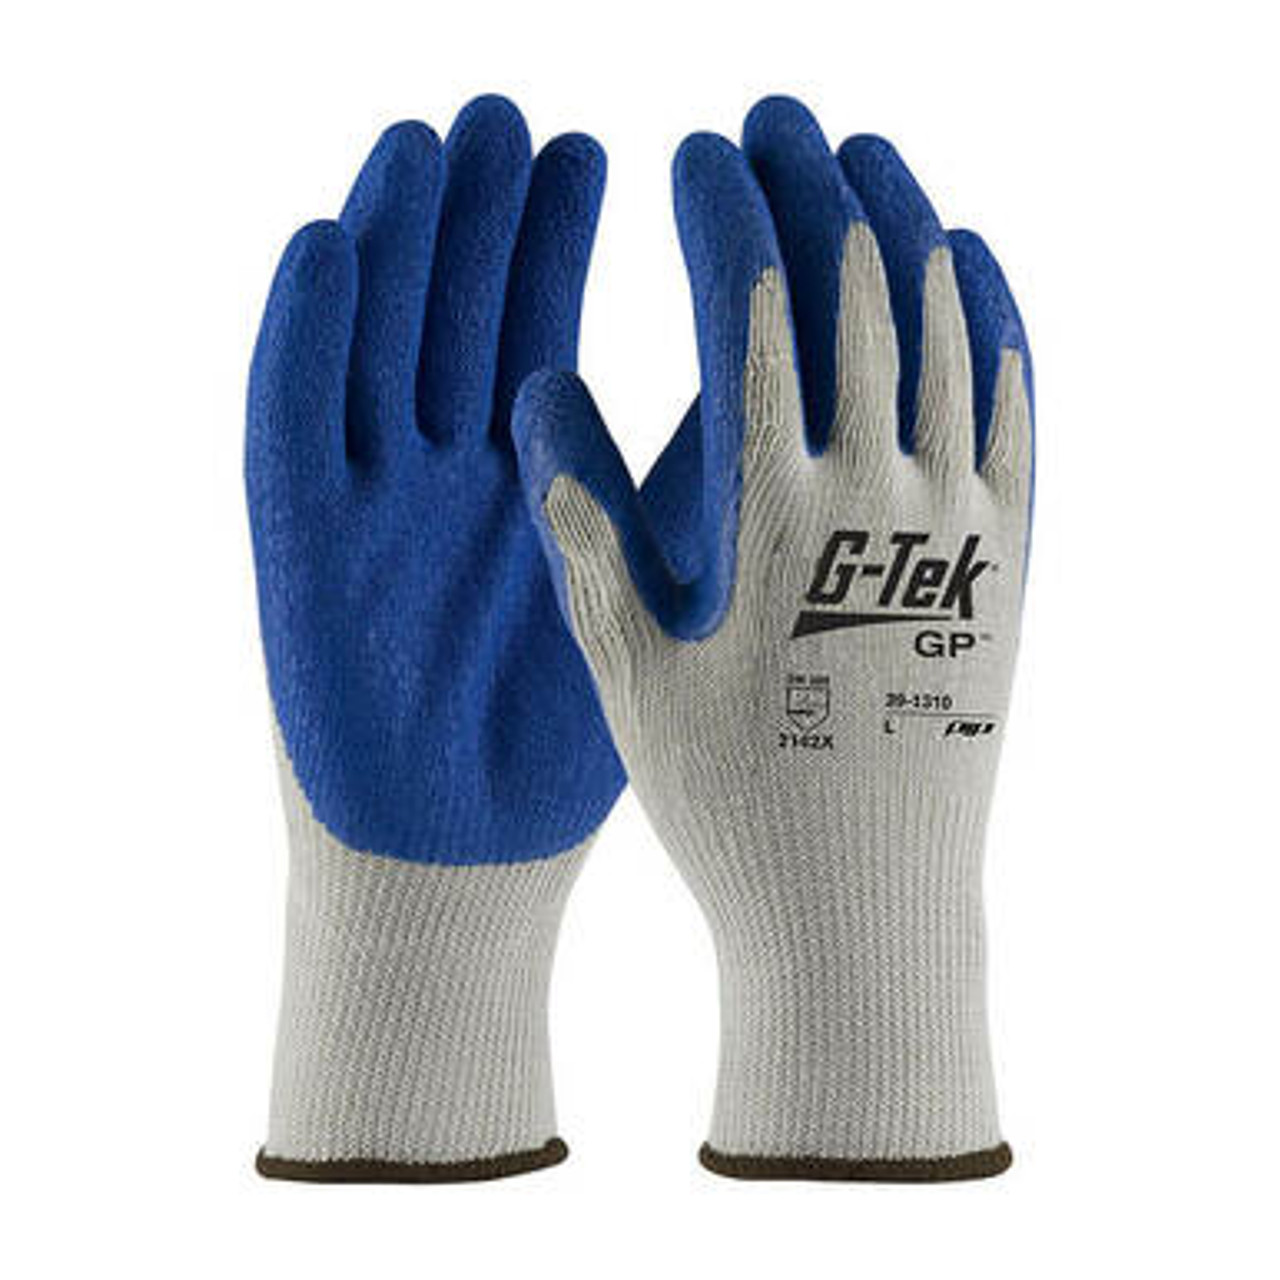 Latex-Coated Roofing Gloves  Flash Lite Roofing and Industrial Gloves